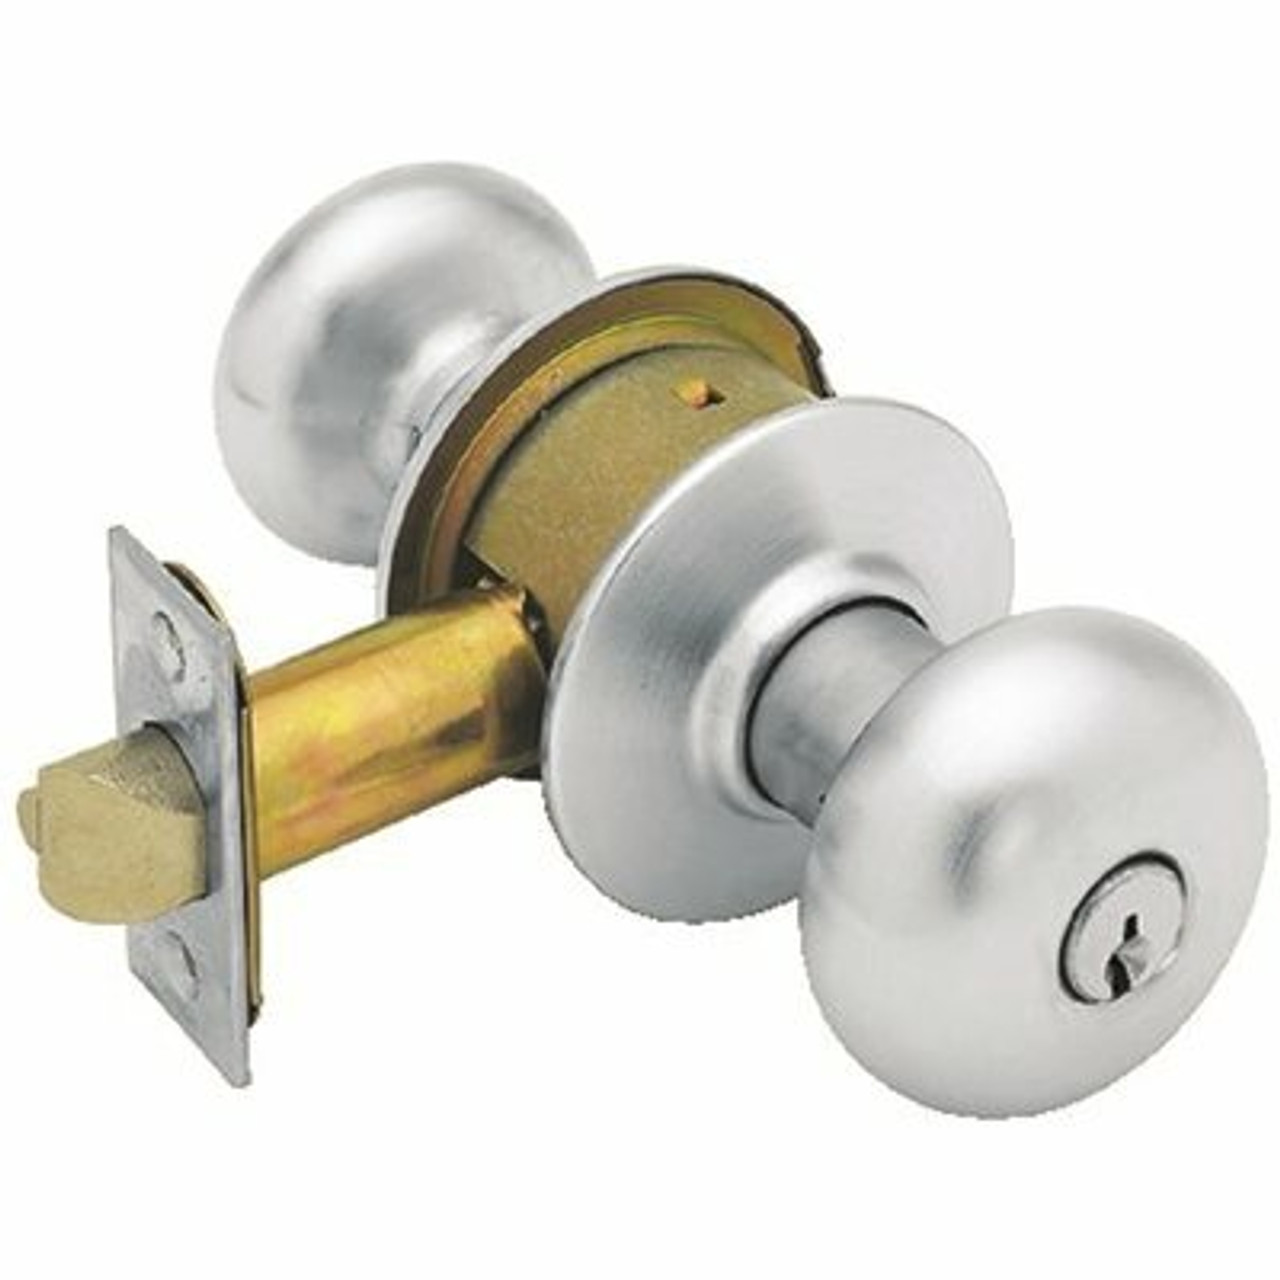 Schlage A Entry Plymouth Lockset 2-3/8'' Bs Sc1 Chrome